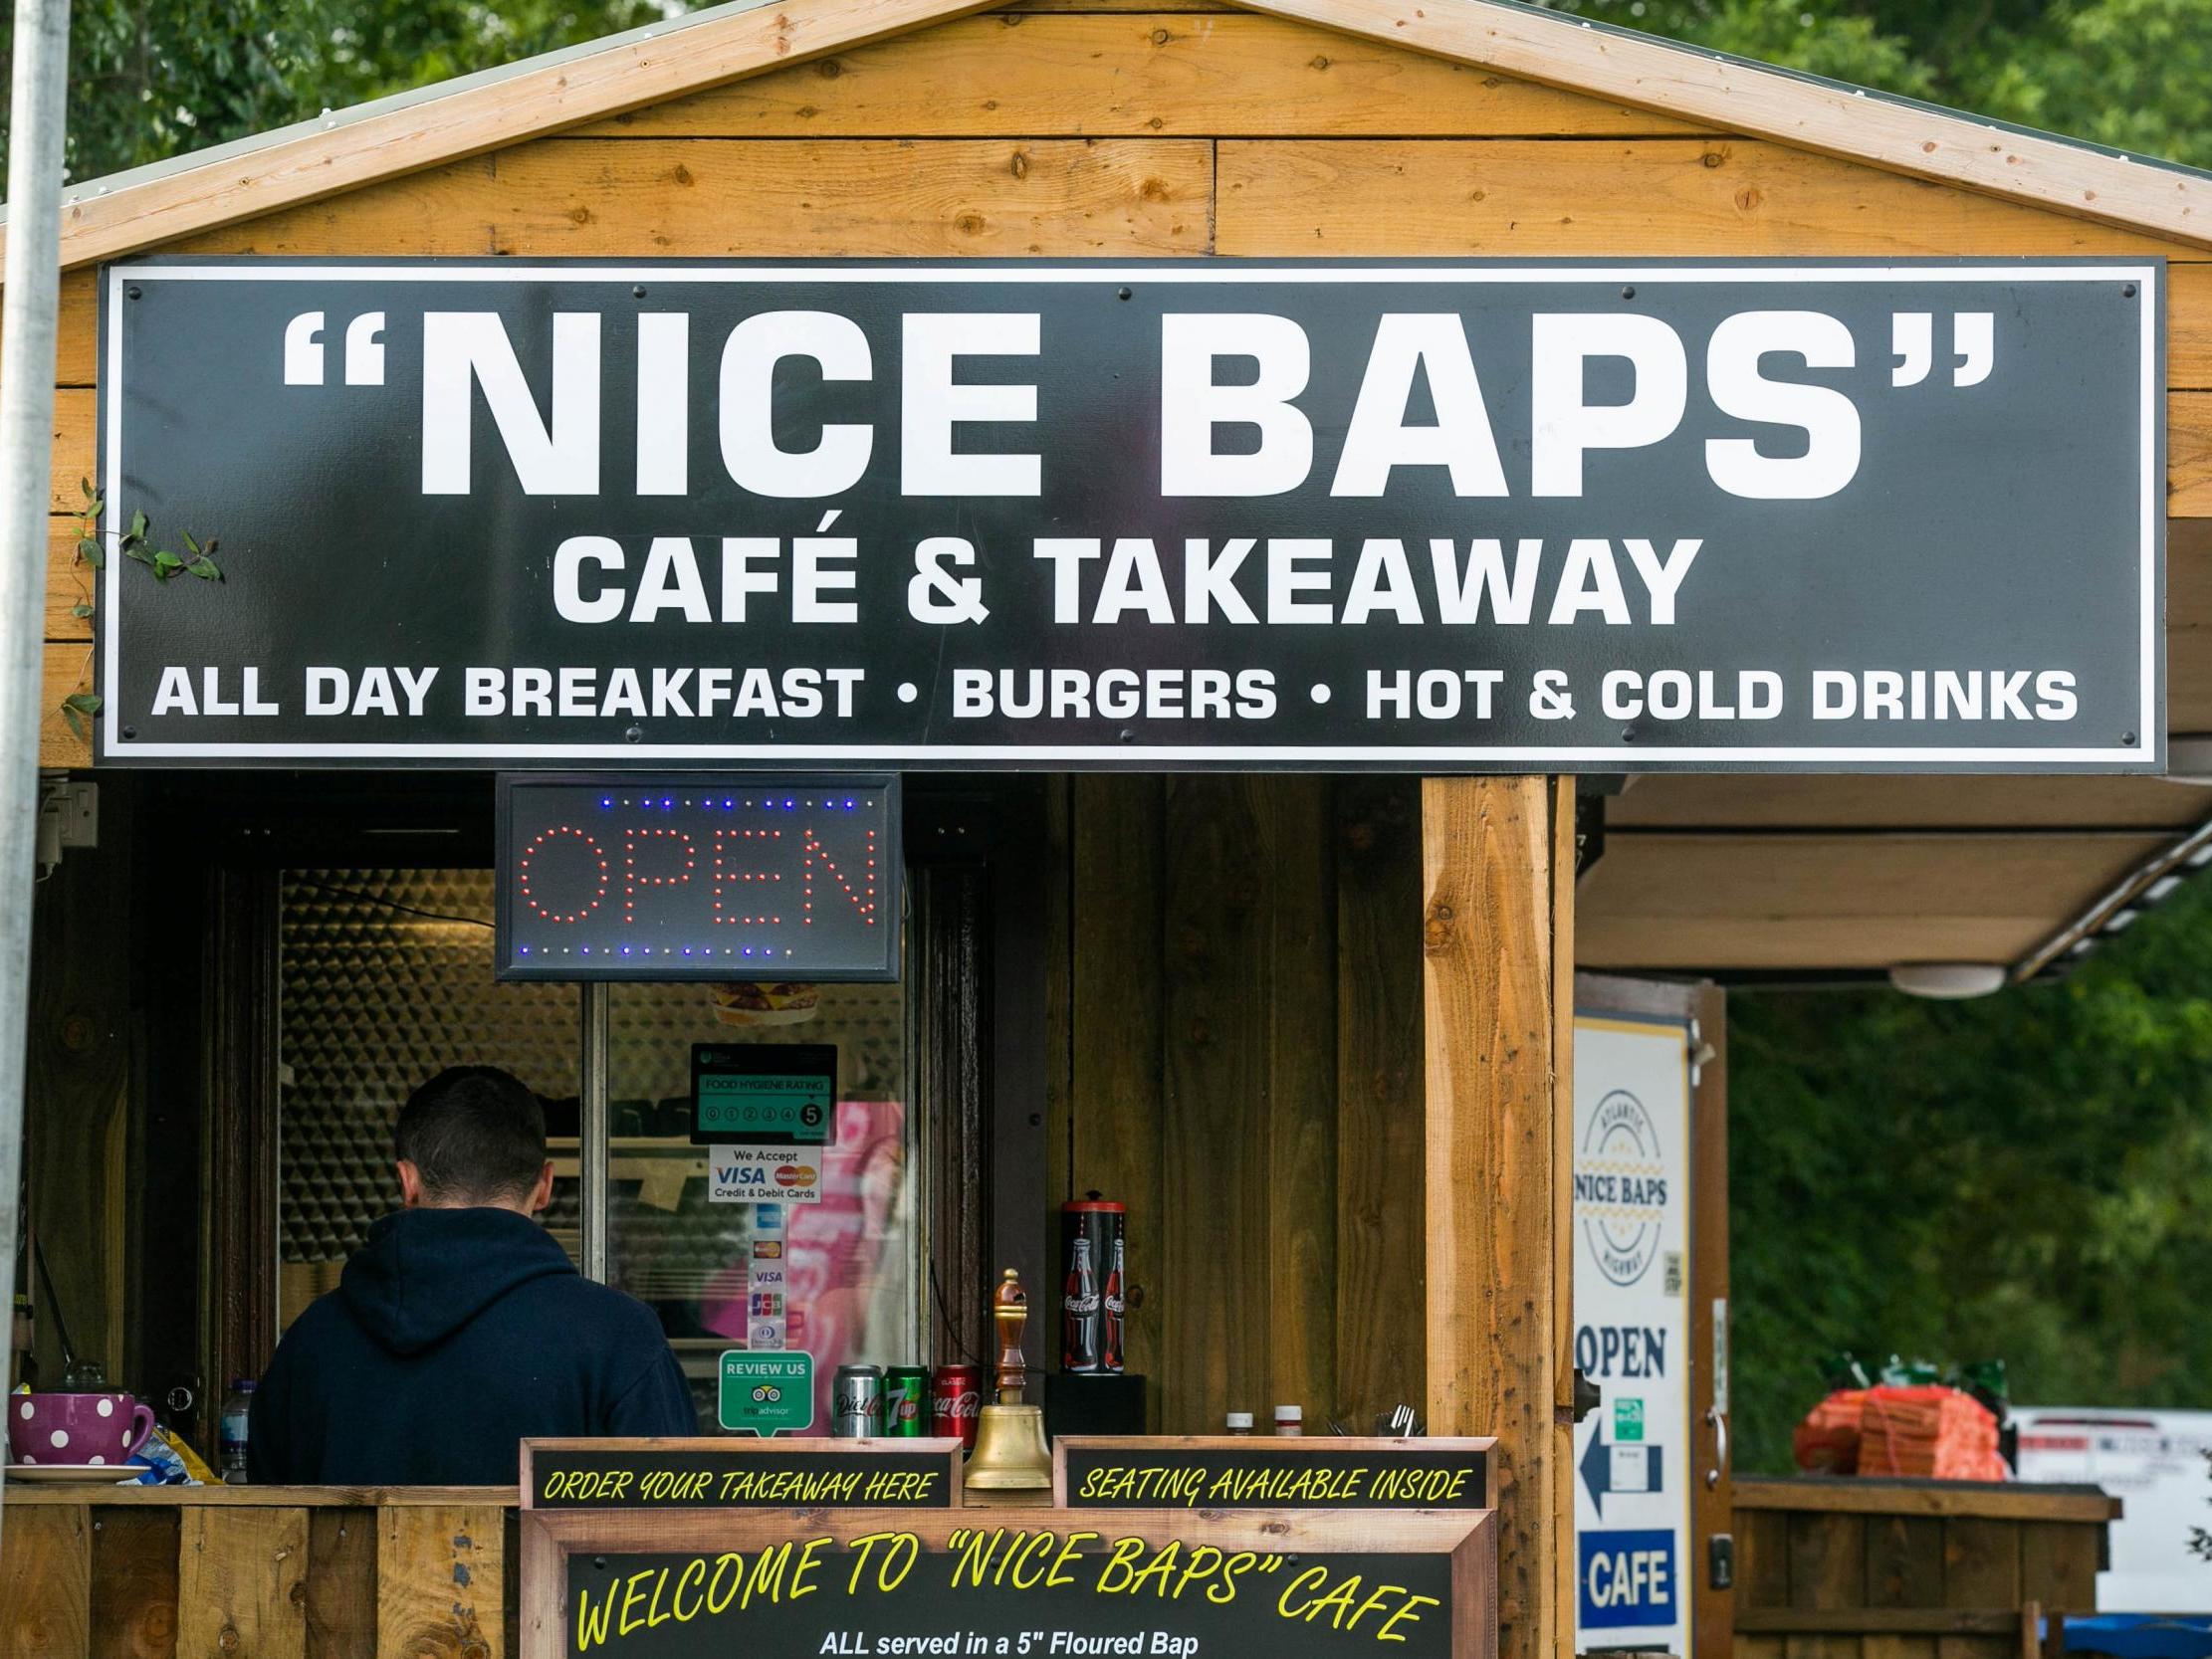 Nice Baps cafe near Wadebridge is fighting to retain its trading licence